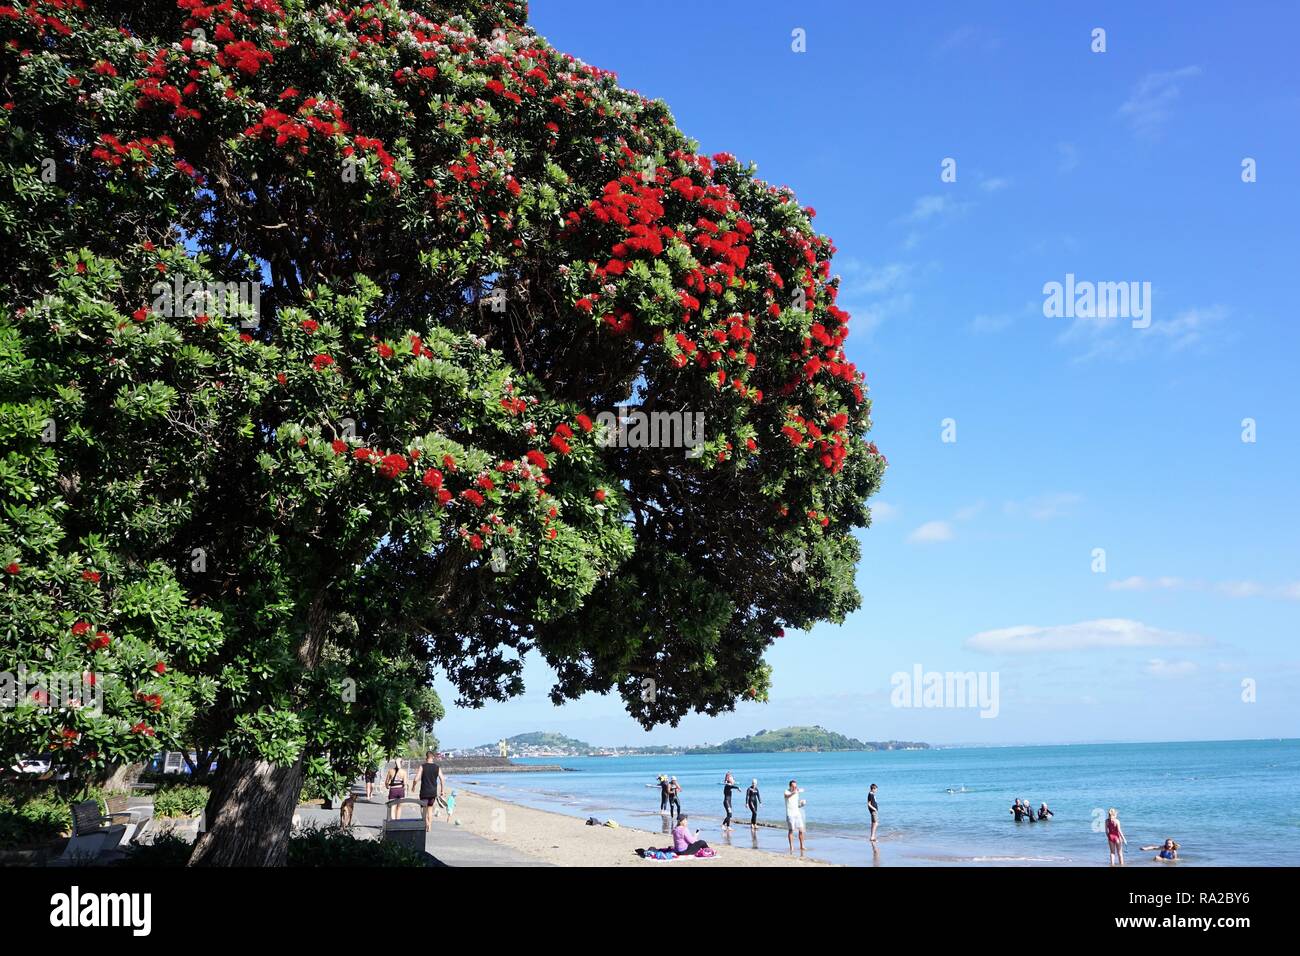 Pohutukawa Tree glowing Red against a Blue Sky on Mission Bay Beach, Auckland, New Zealand Stock Photo